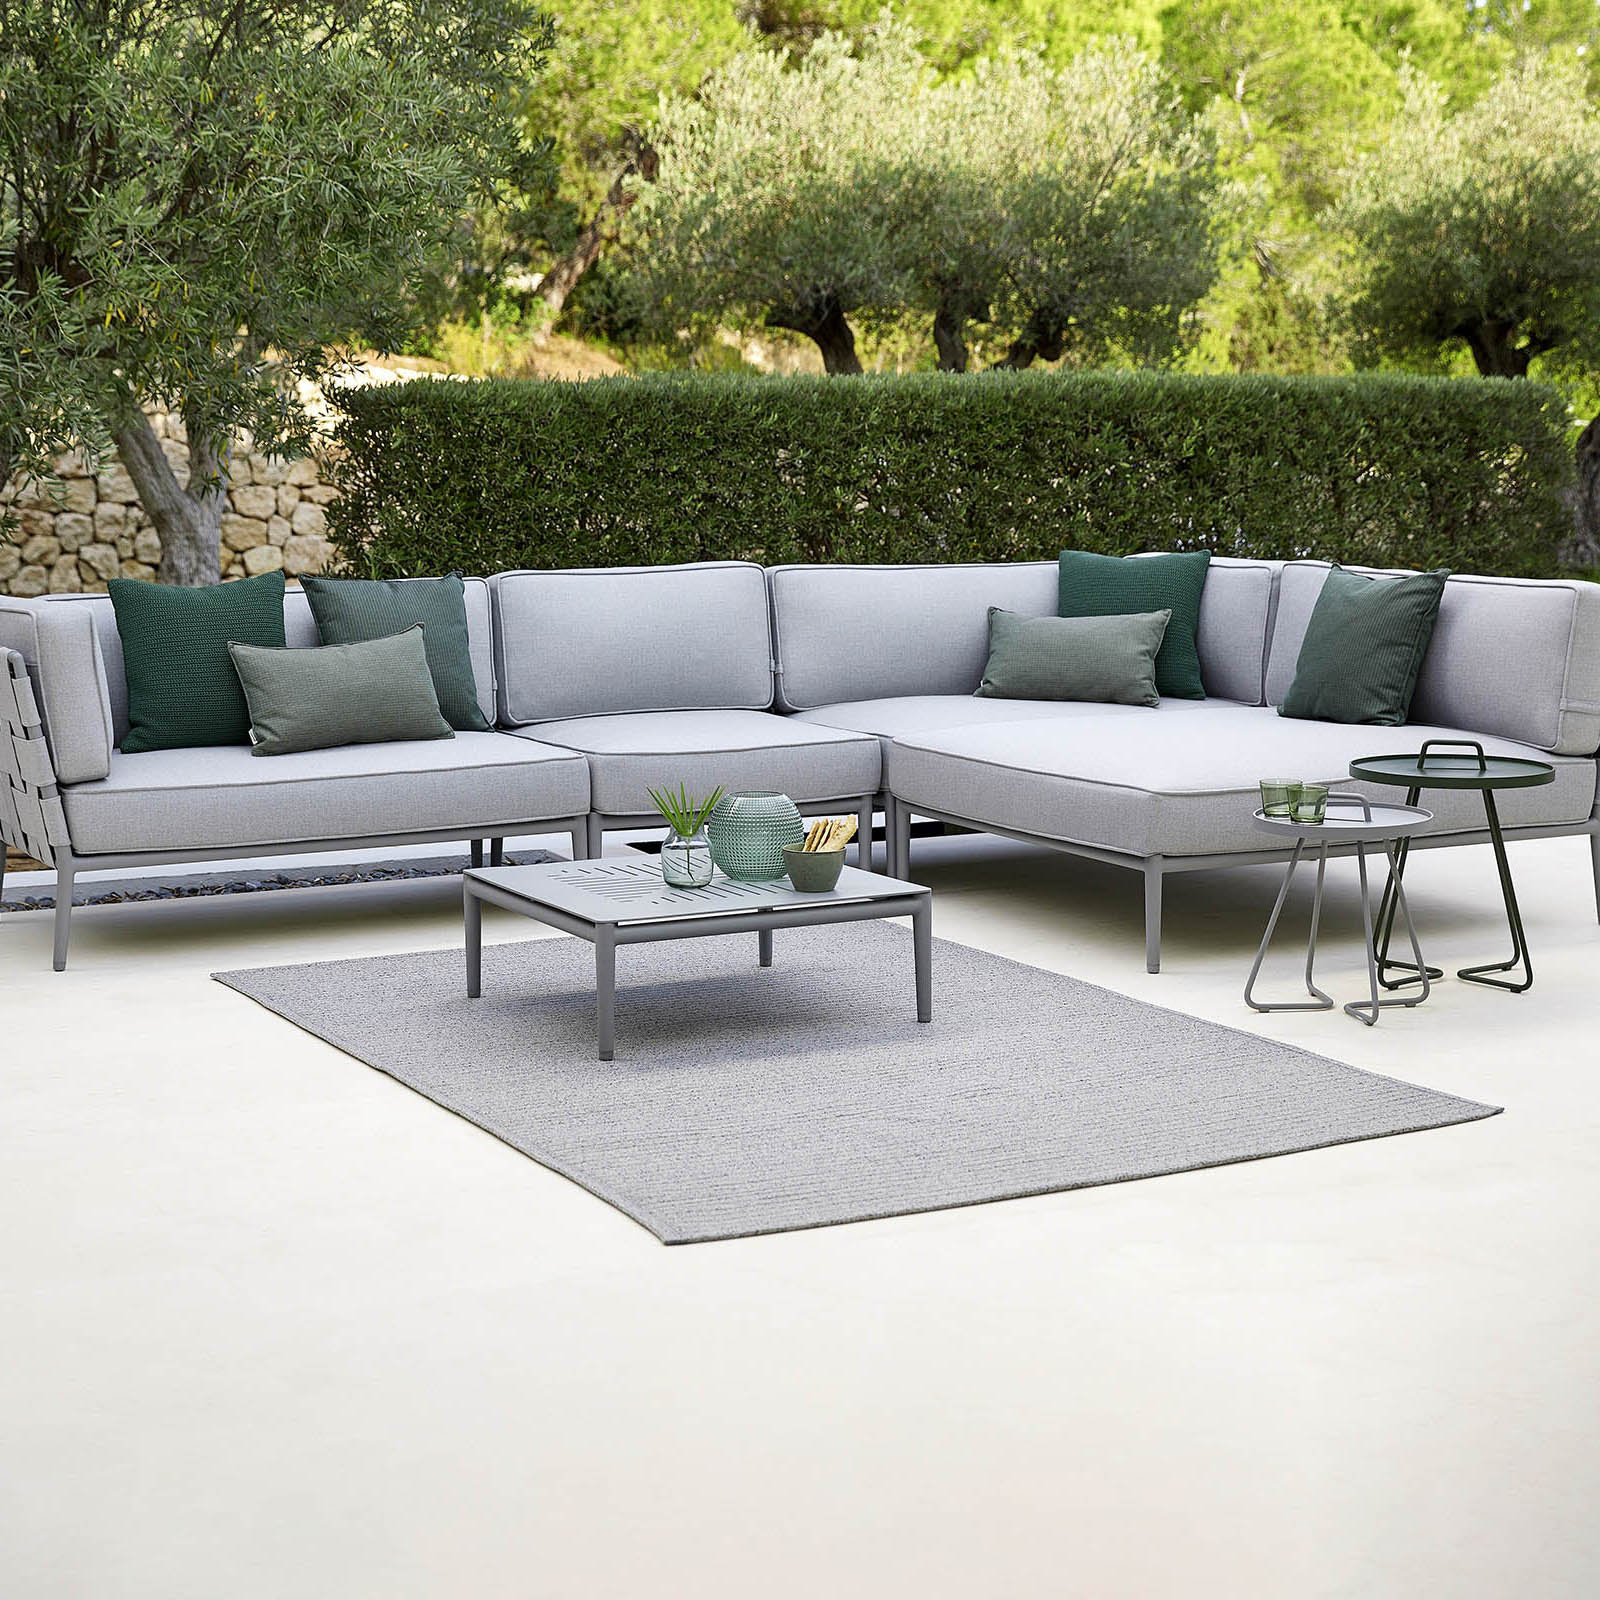 Conic 2-Sitzer Sofa-Modul rechts aus Cane-line AirTouch mit QuickDry in Grey